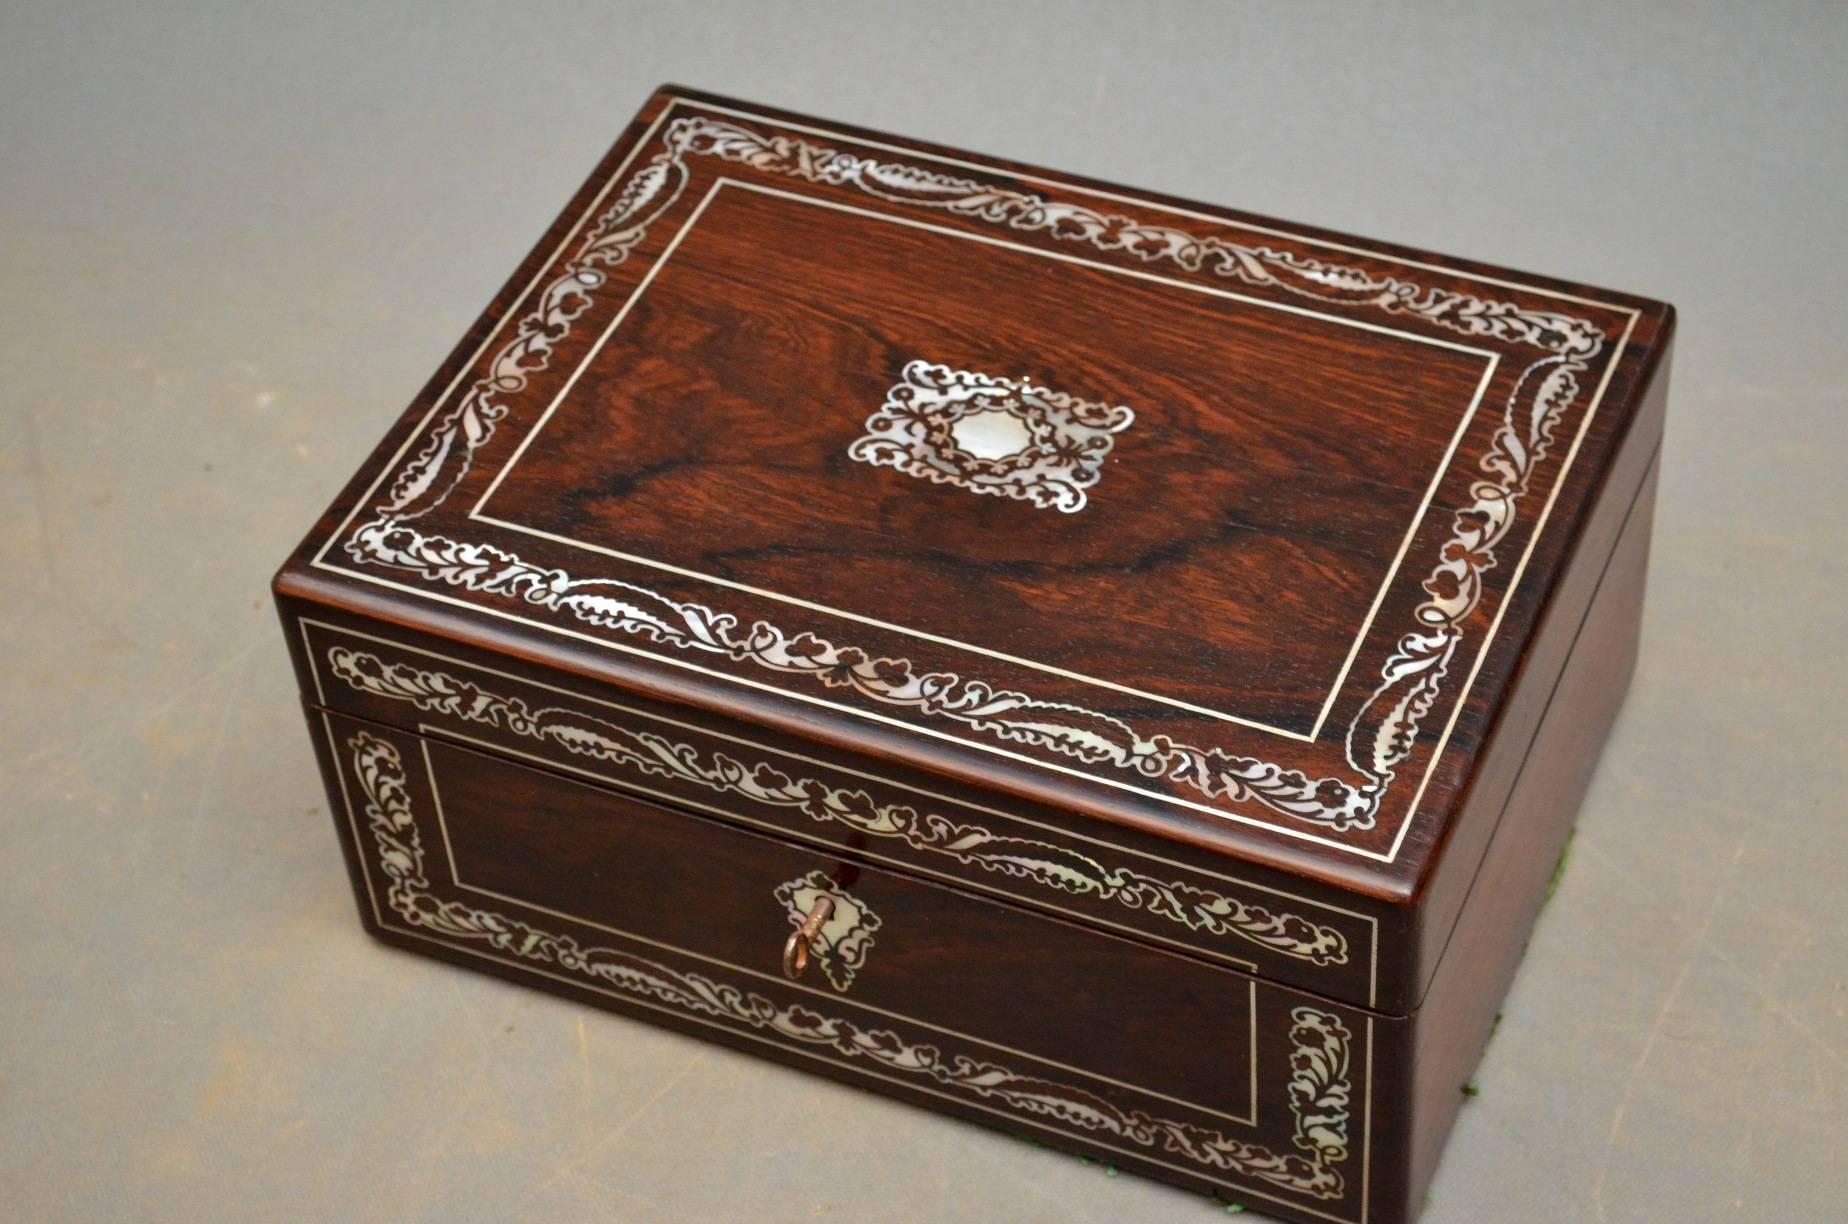 Regency Mother-of-Pearl Inlaid Jewelry Box 1